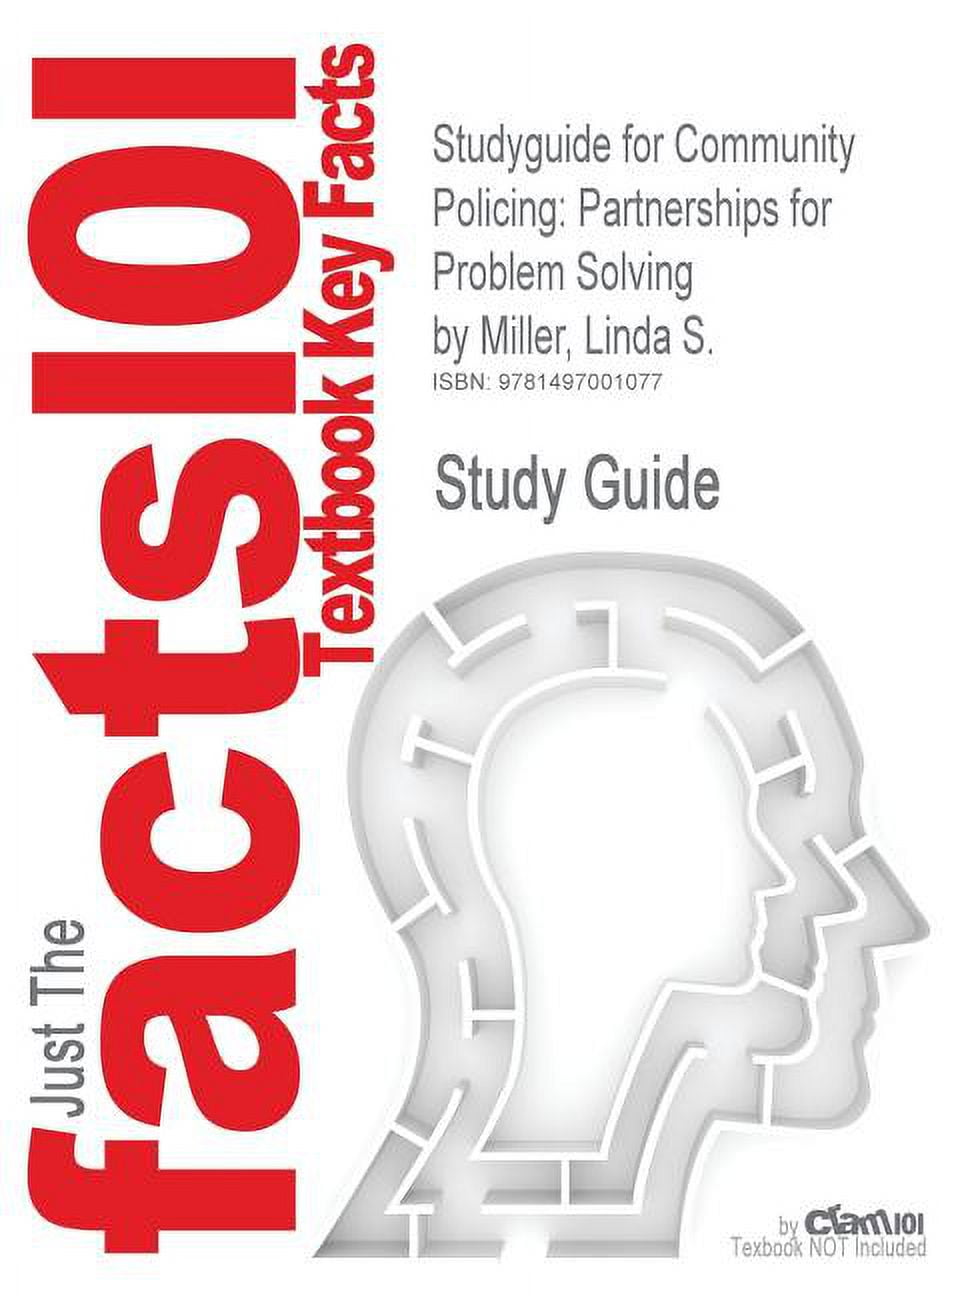 community policing partnerships for problem solving 8th edition free pdf